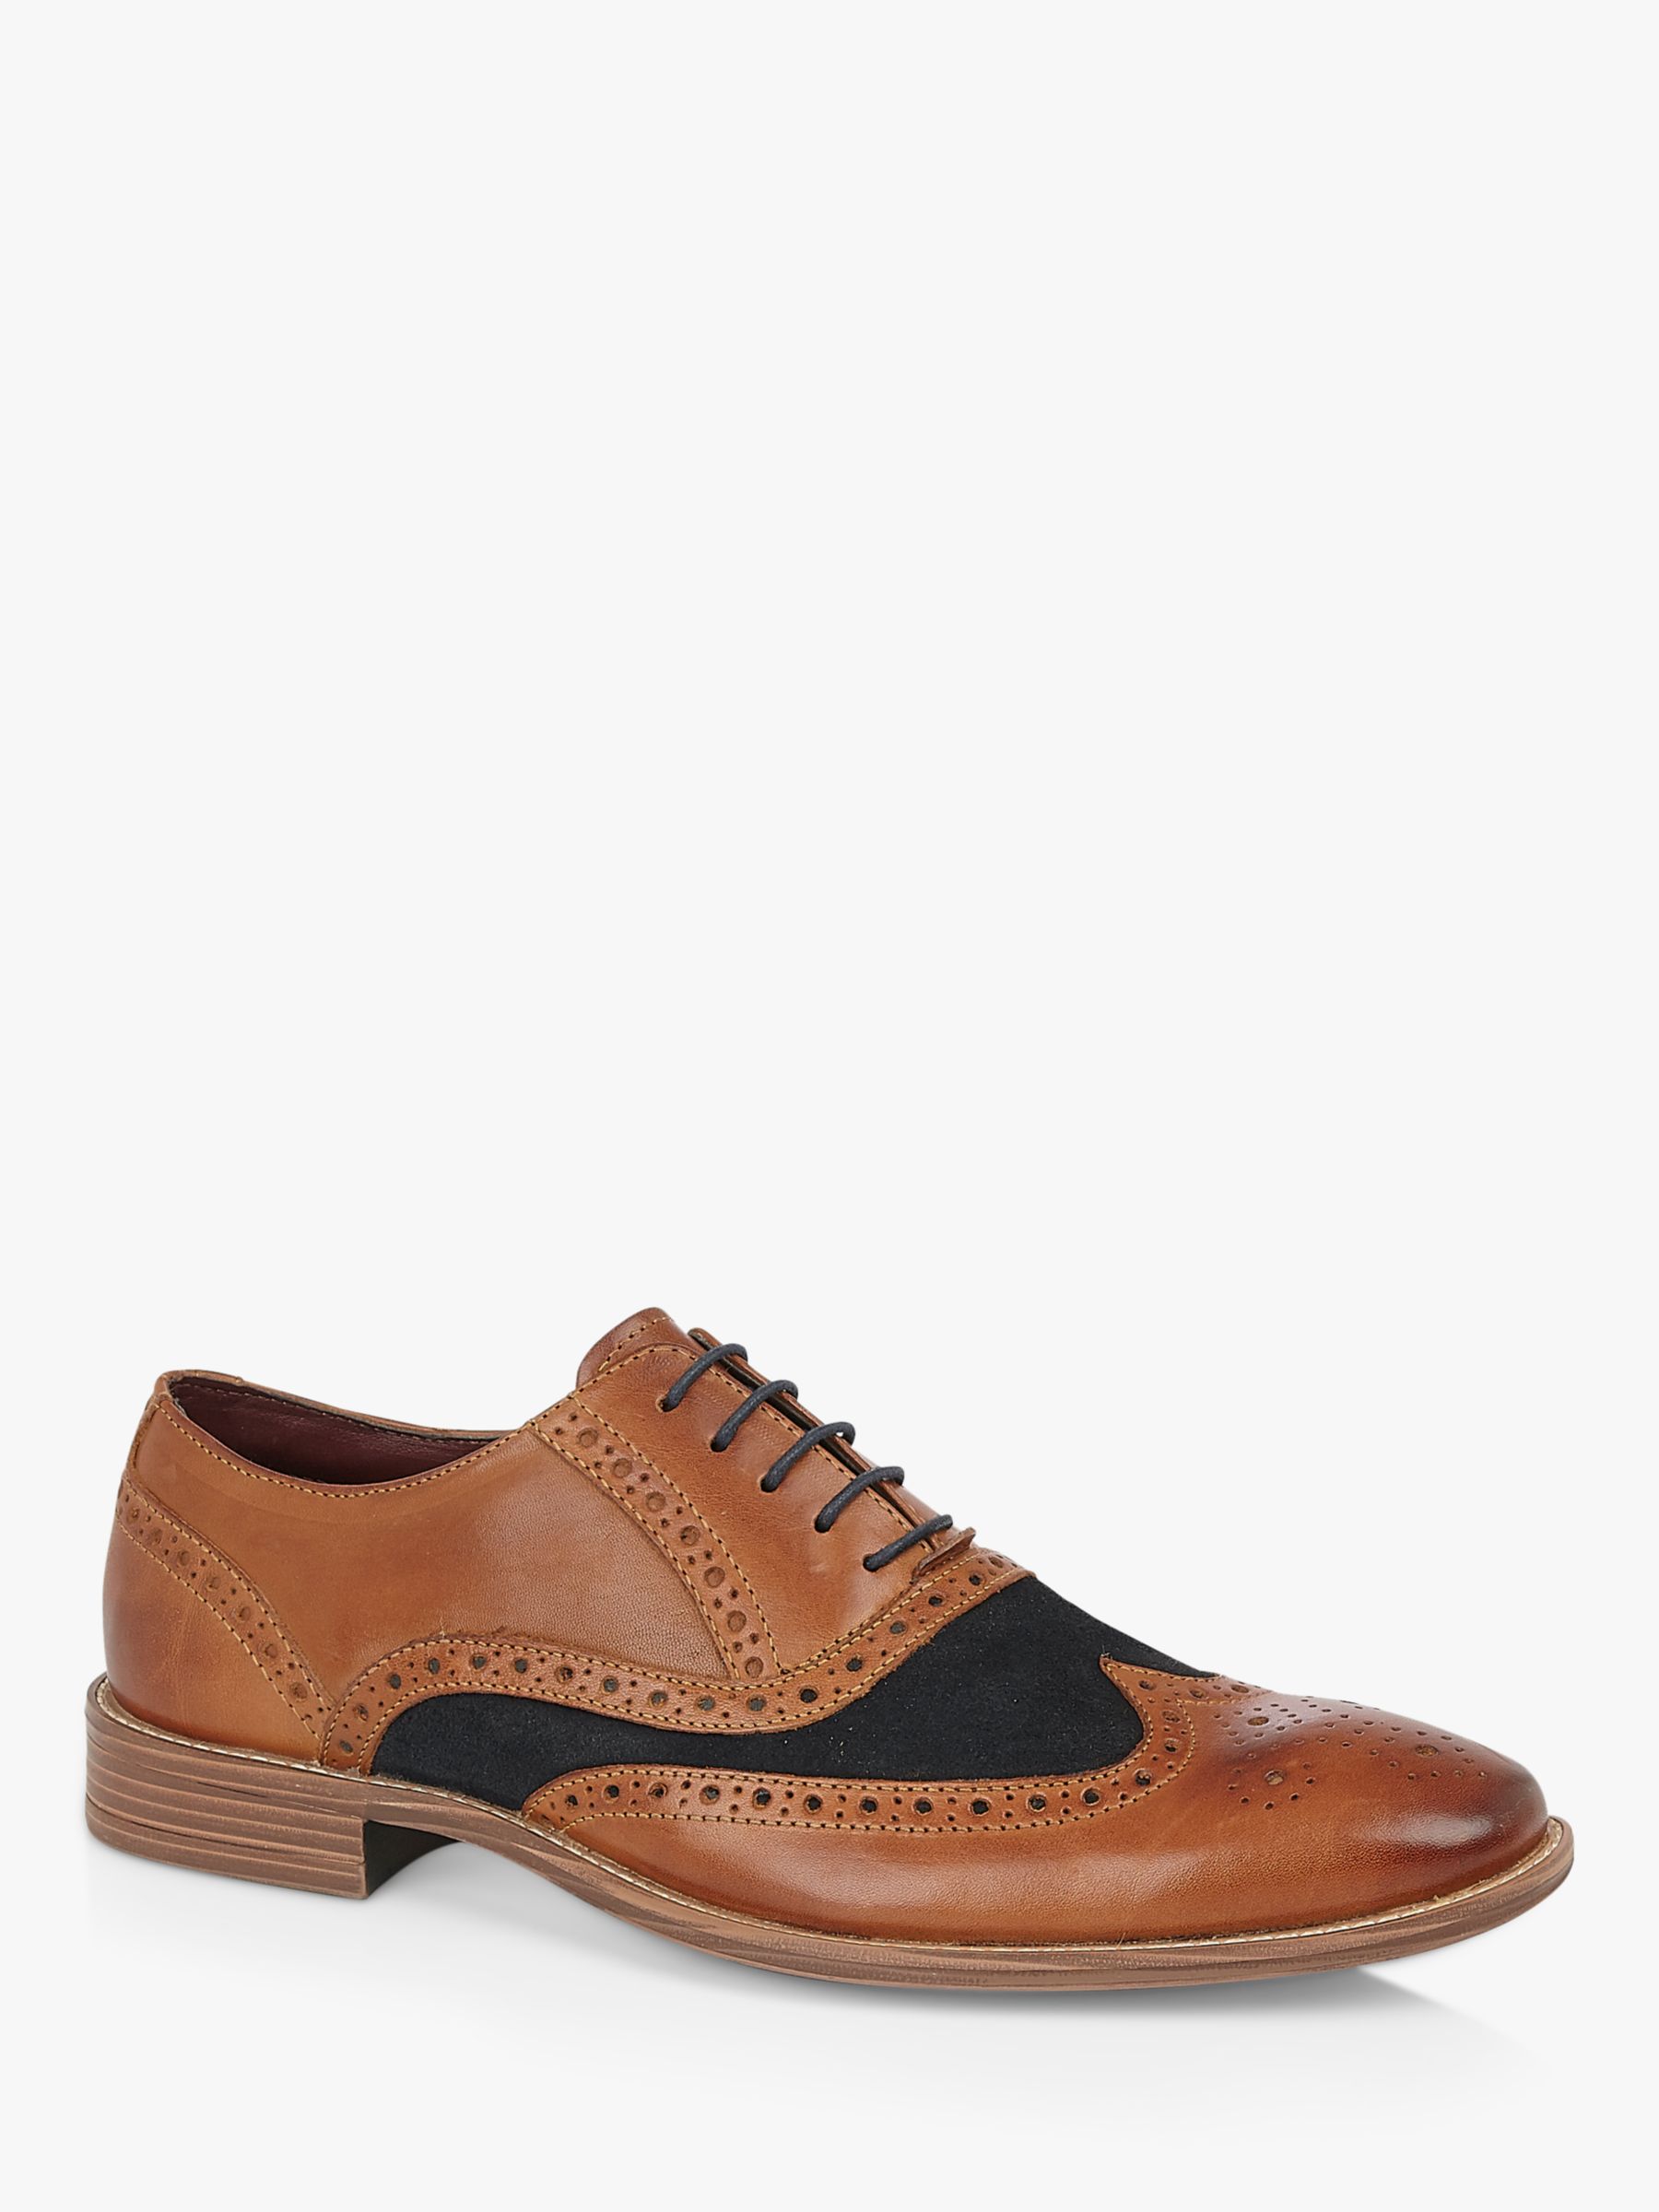 Silver Street London Lennox Leather Suede Formal Oxford Shoes, Tan at ...